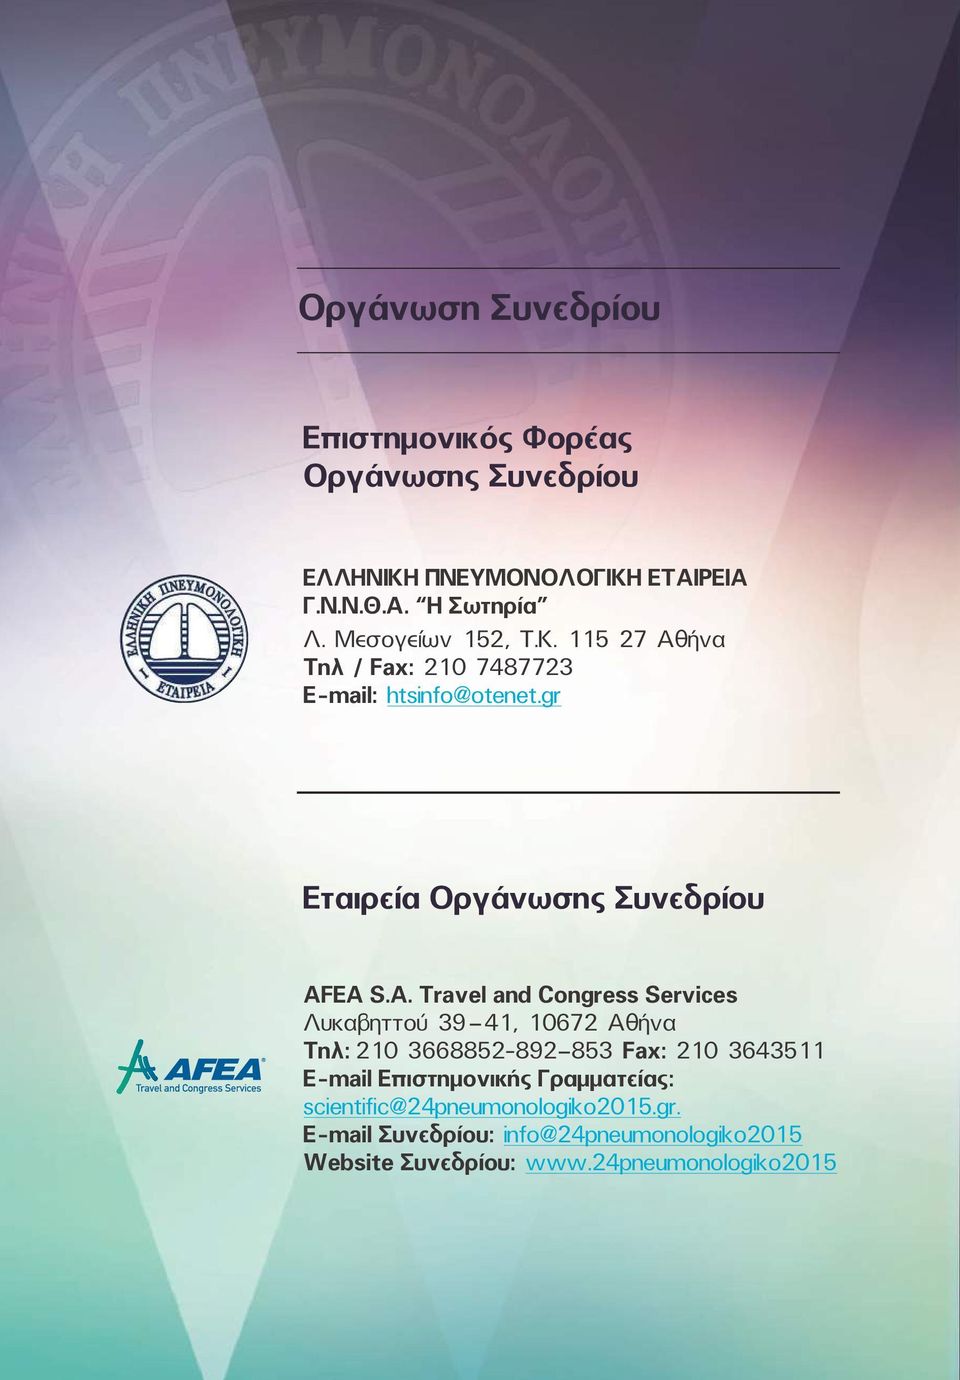 EA S.A. Travel and Congress Services Λυκαβηττού 39-41, 10672 Αθήνα Τηλ: 210 3668852 892-853 Fax: 210 3643511 E-mail